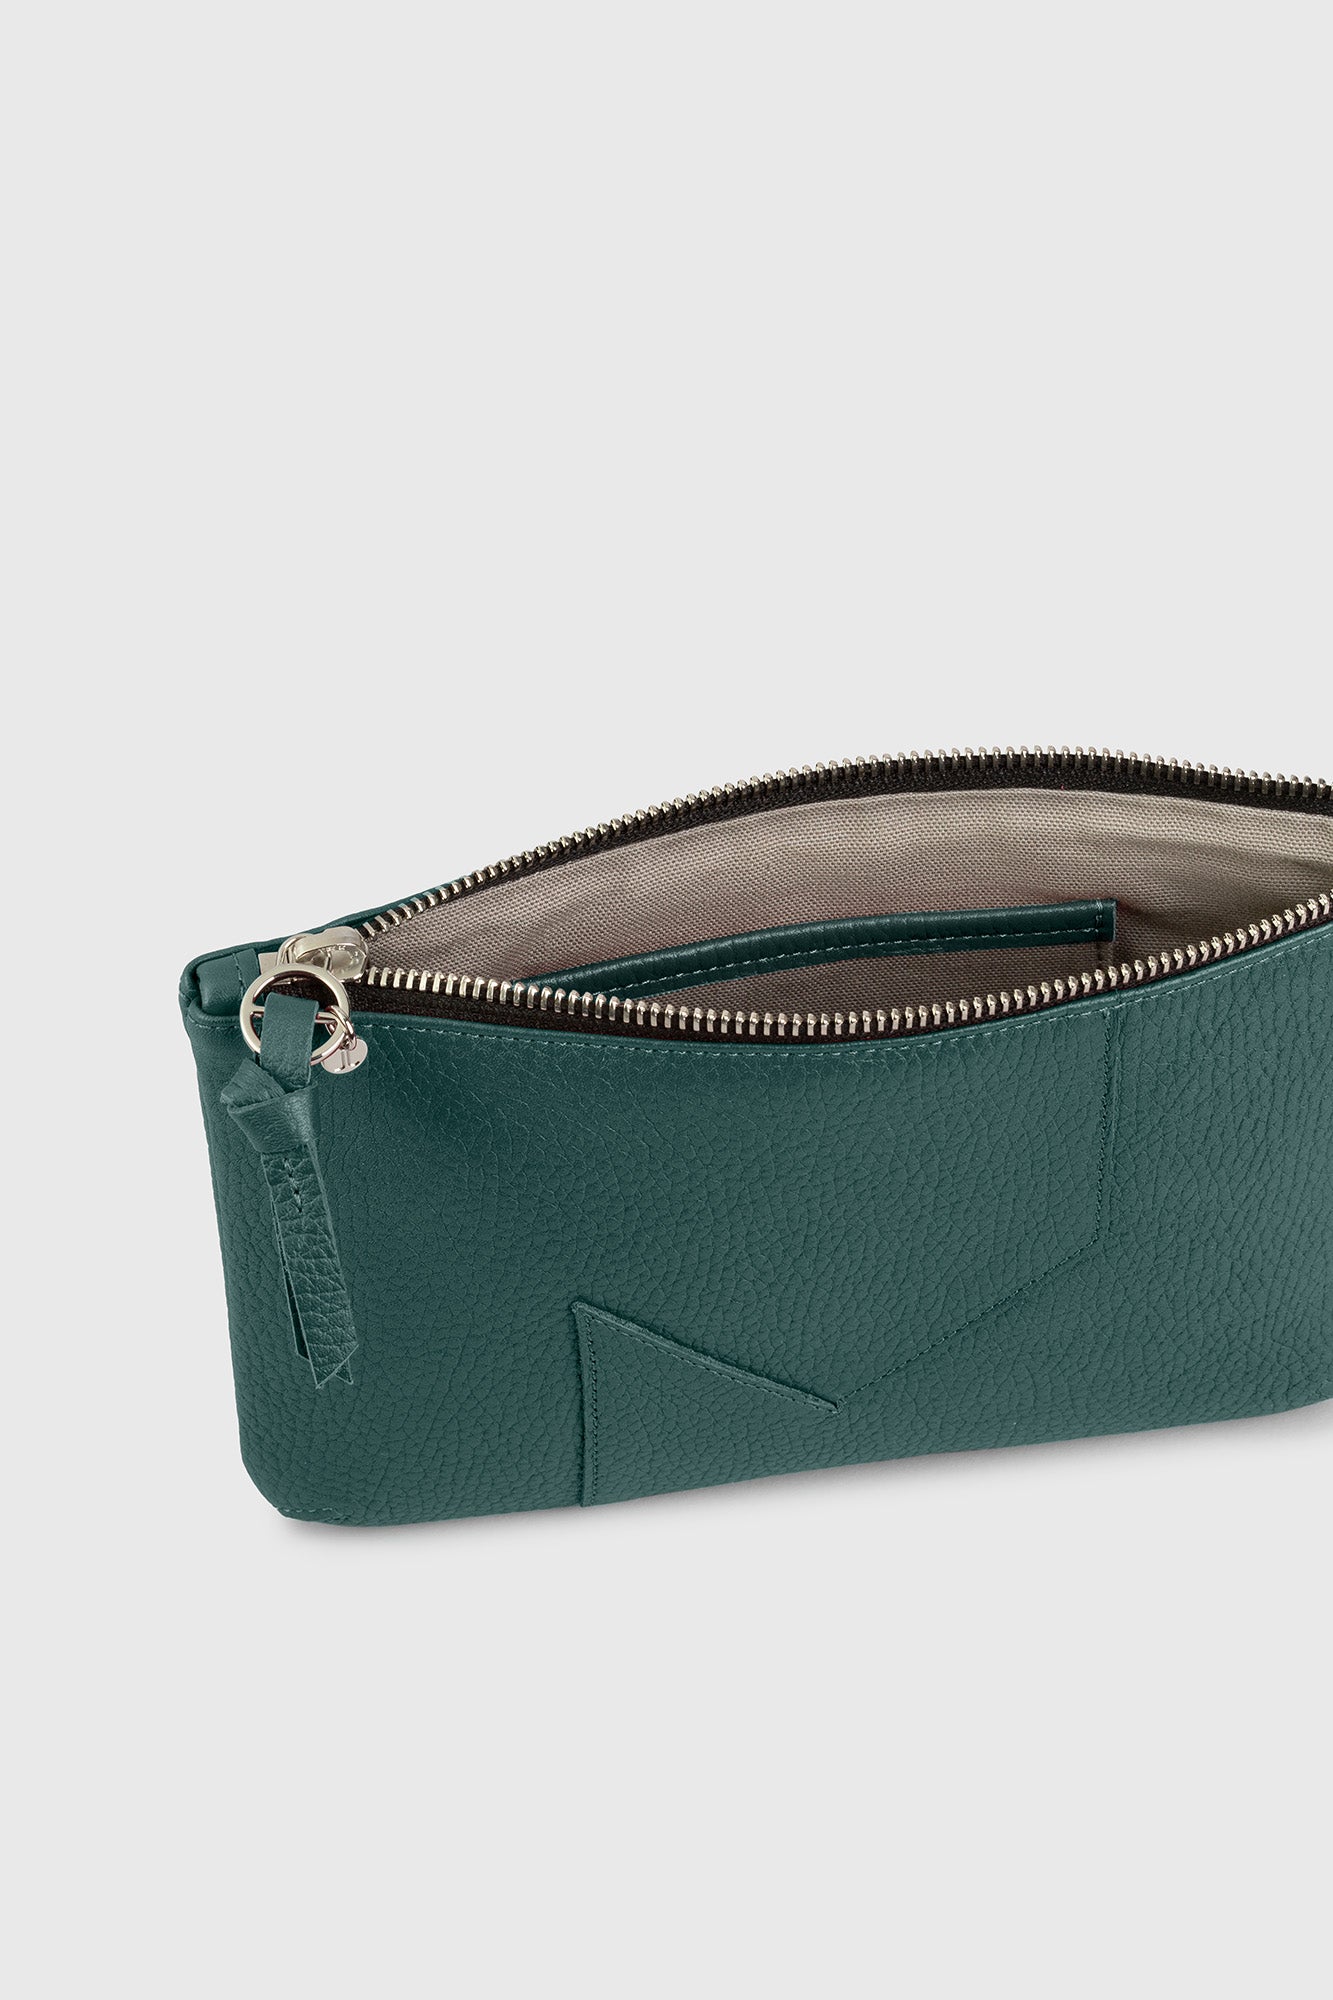 JL pouch leather - Teal green